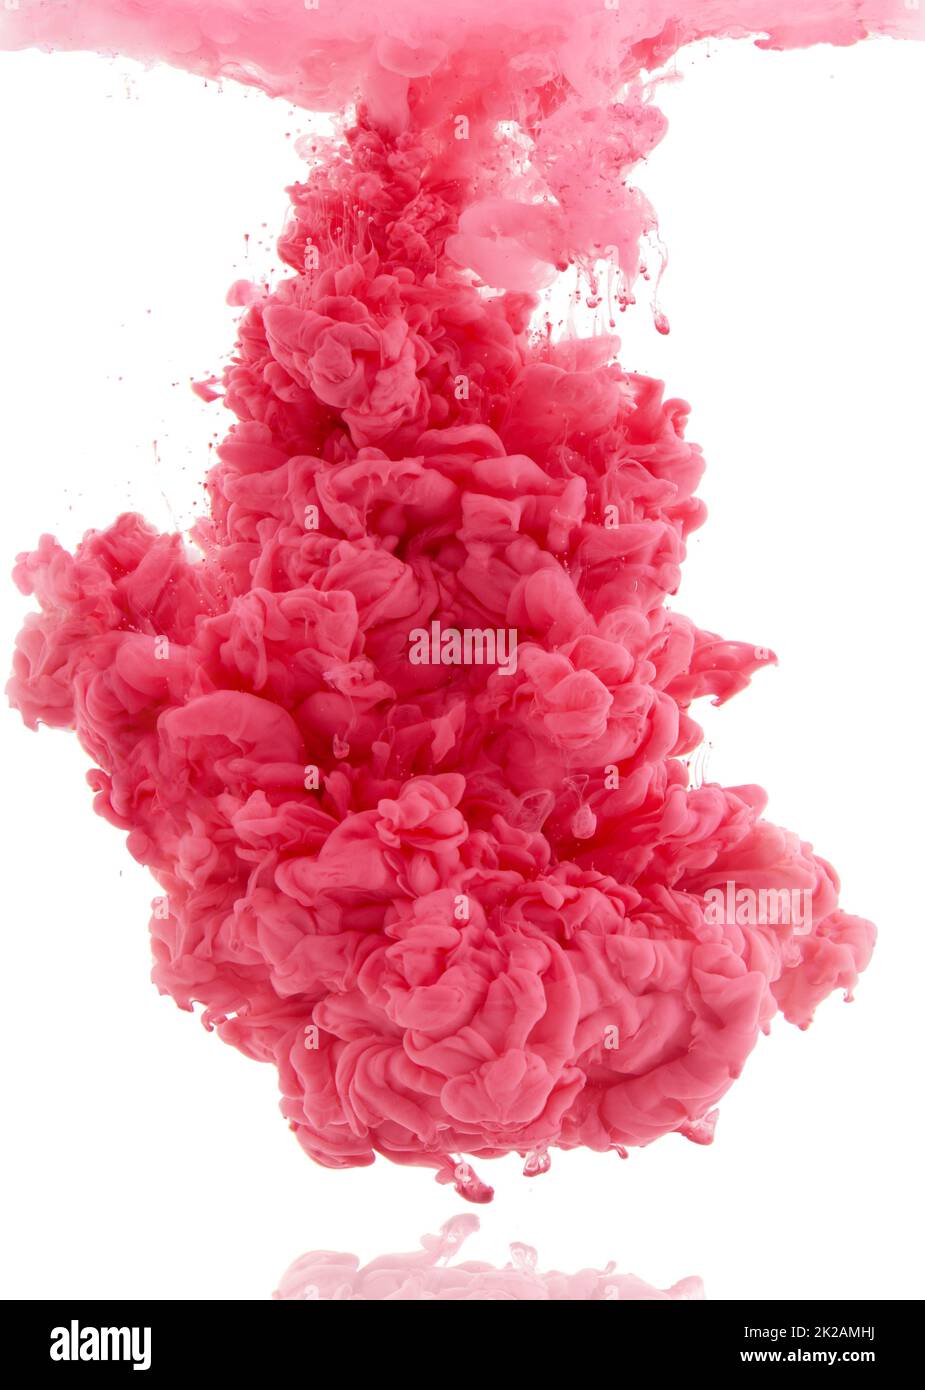 Colorful explosion. Studio shot of pink ink in water against a white background. Stock Photo